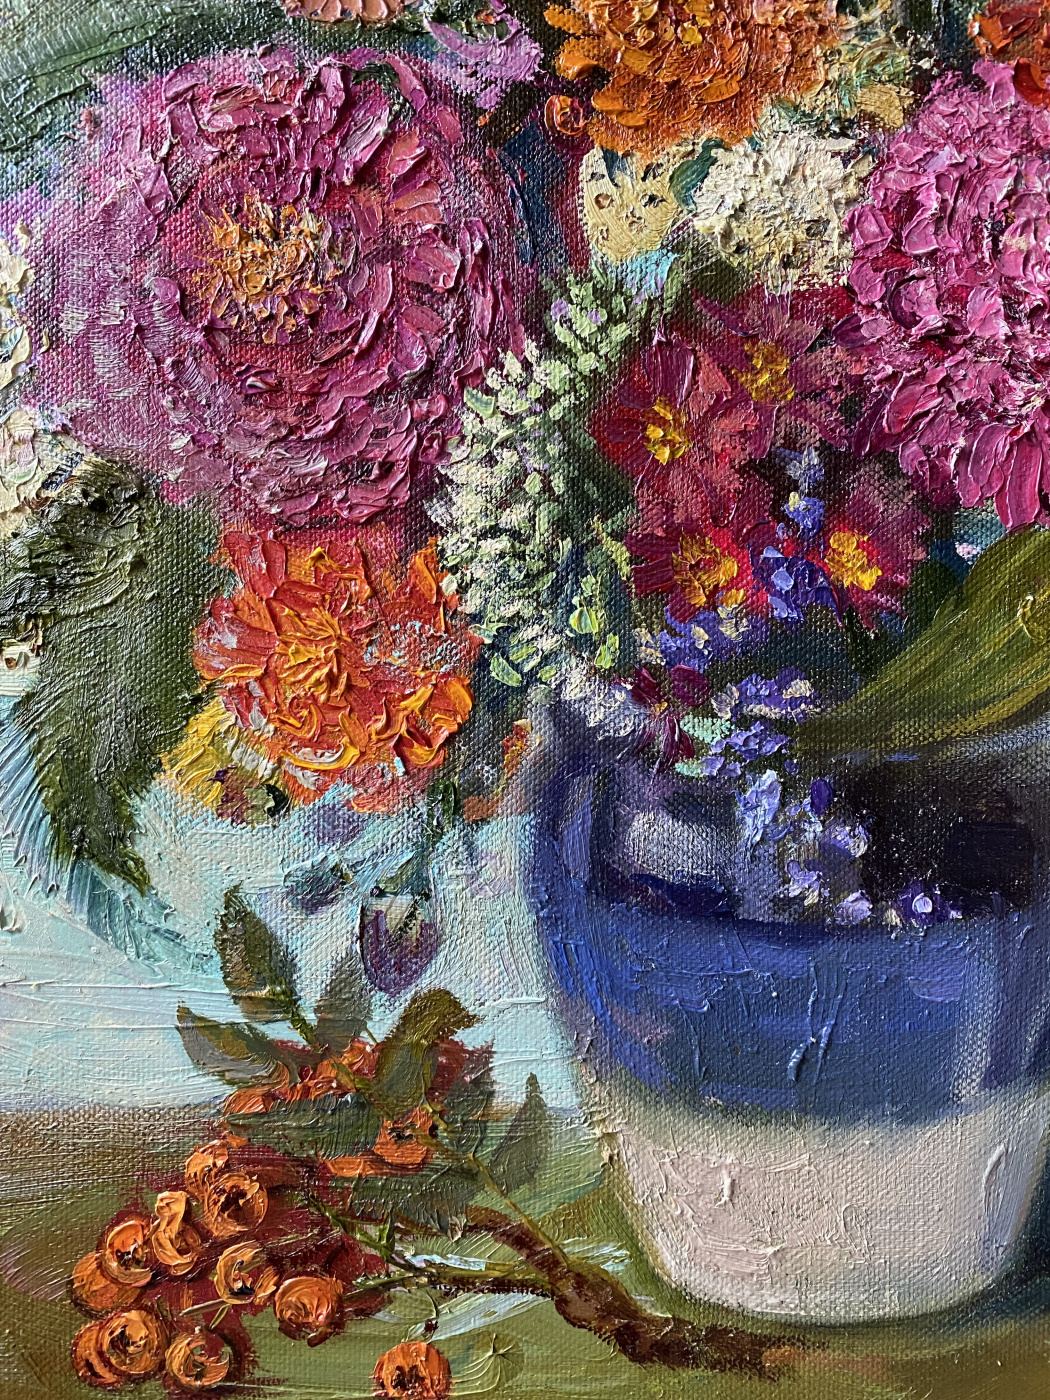 Still Life with Autumn Flowers and Berries